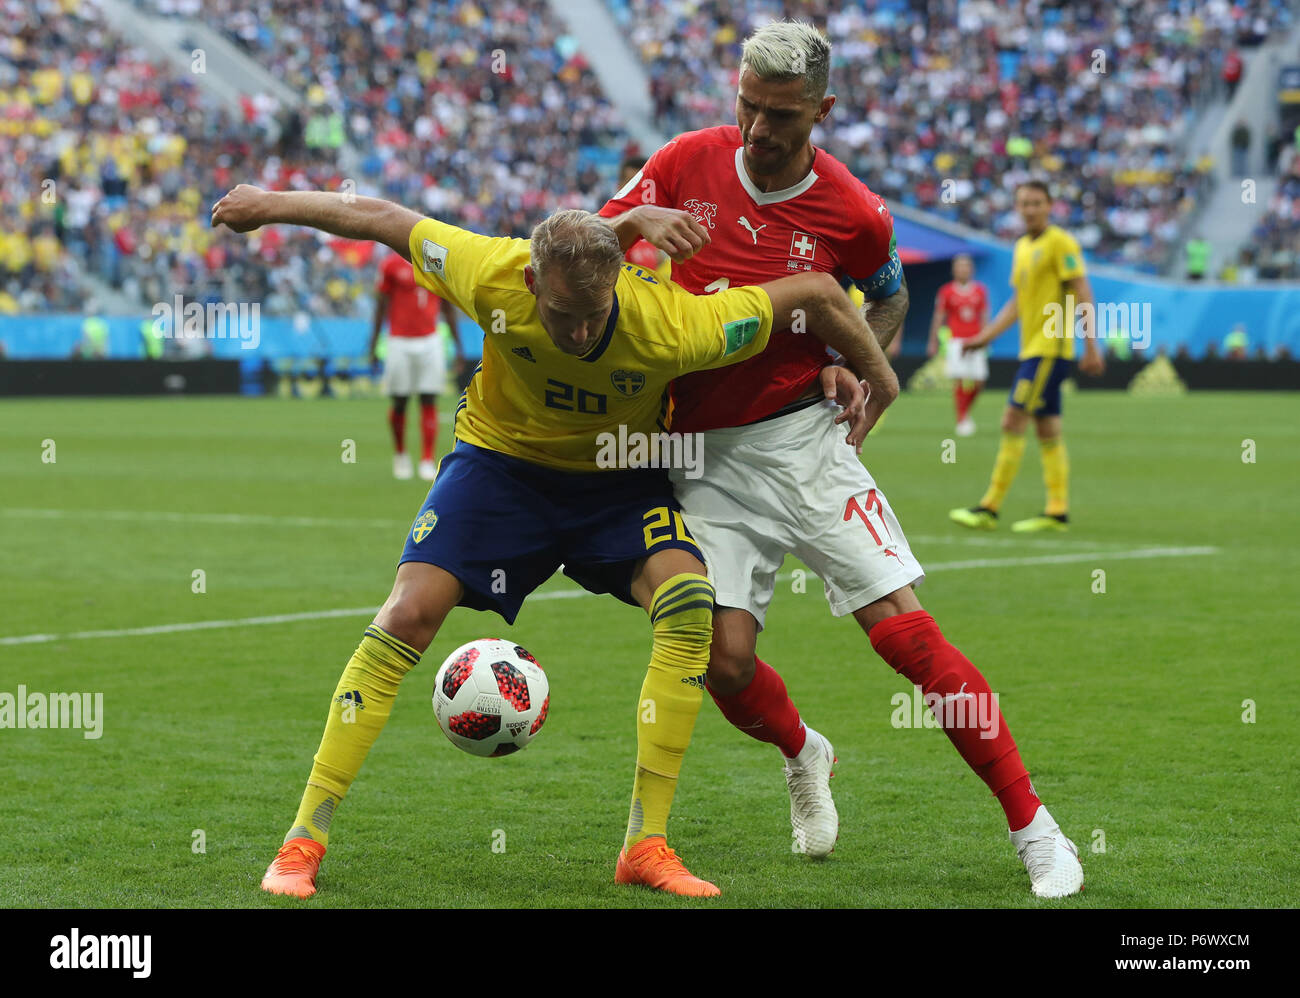 Saint Petersburg, Russia. 3rd July, 2018. Valon Behrami (R) of Switzerland vies with Ola Toivonen of Sweden during the 2018 FIFA World Cup round of 16 match between Switzerland and Sweden in Saint Petersburg, Russia, July 3, 2018. Sweden won 1-0 and advanced to the quarter-final. Credit: Cao Can/Xinhua/Alamy Live News Stock Photo